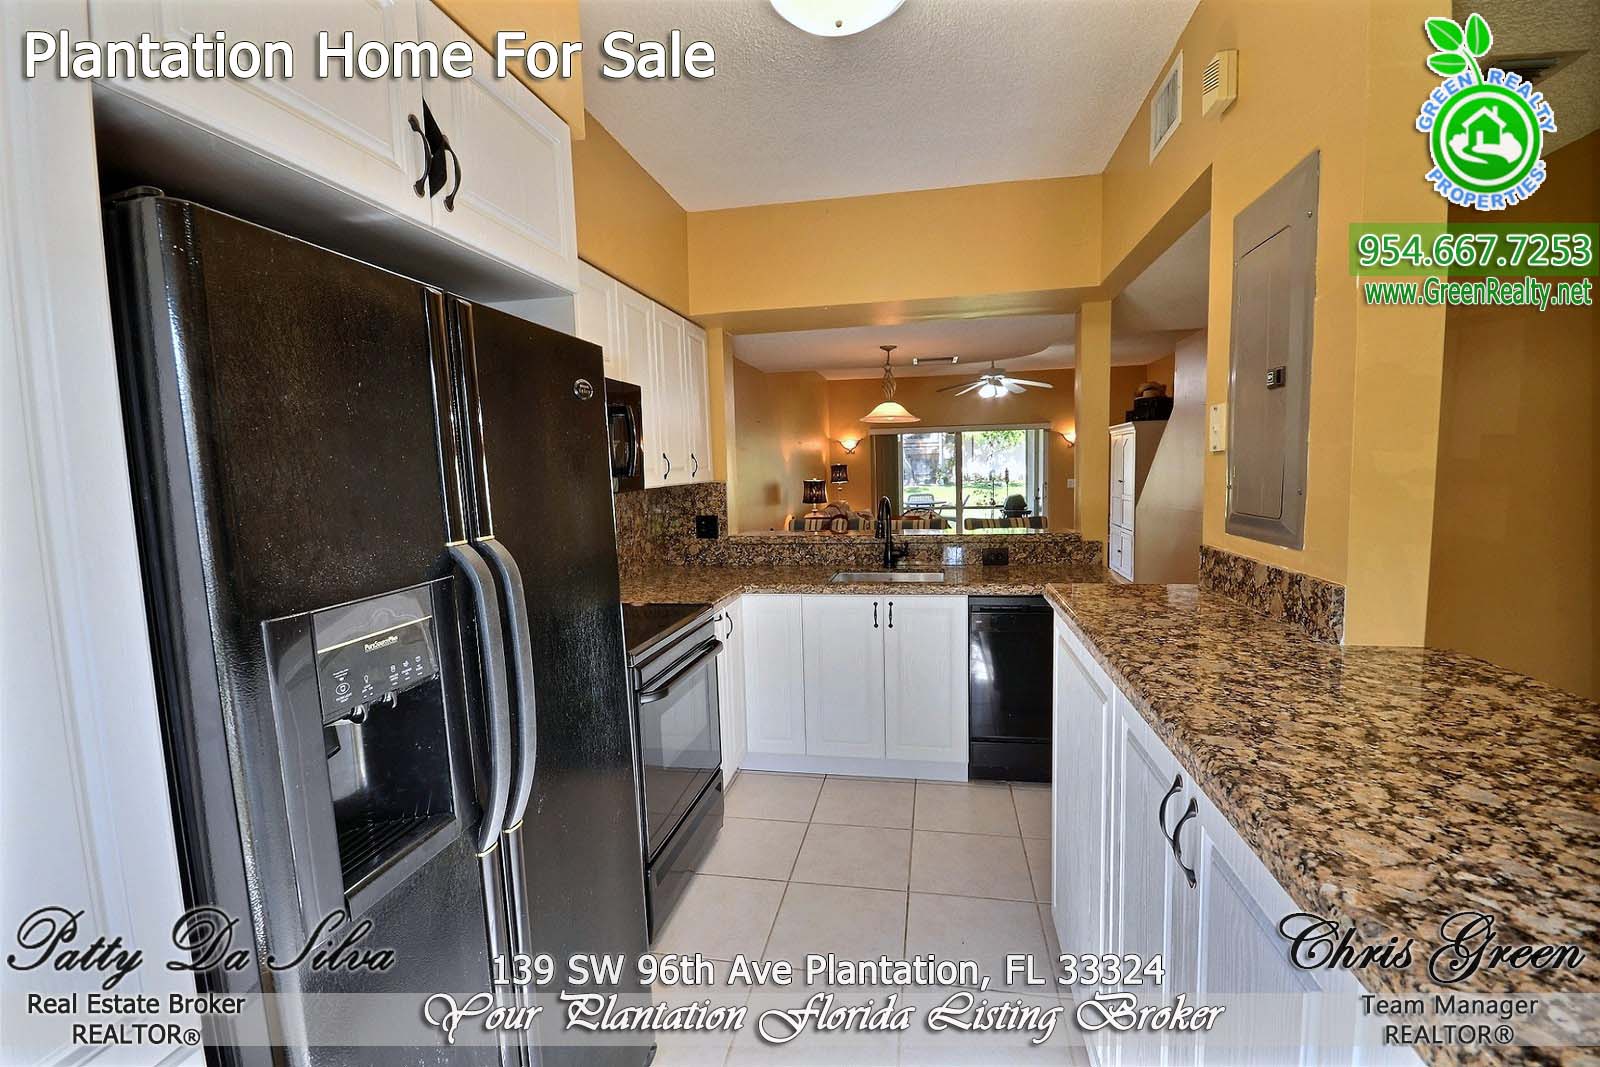 6 Homes For Sale in Plantation Florida (1)